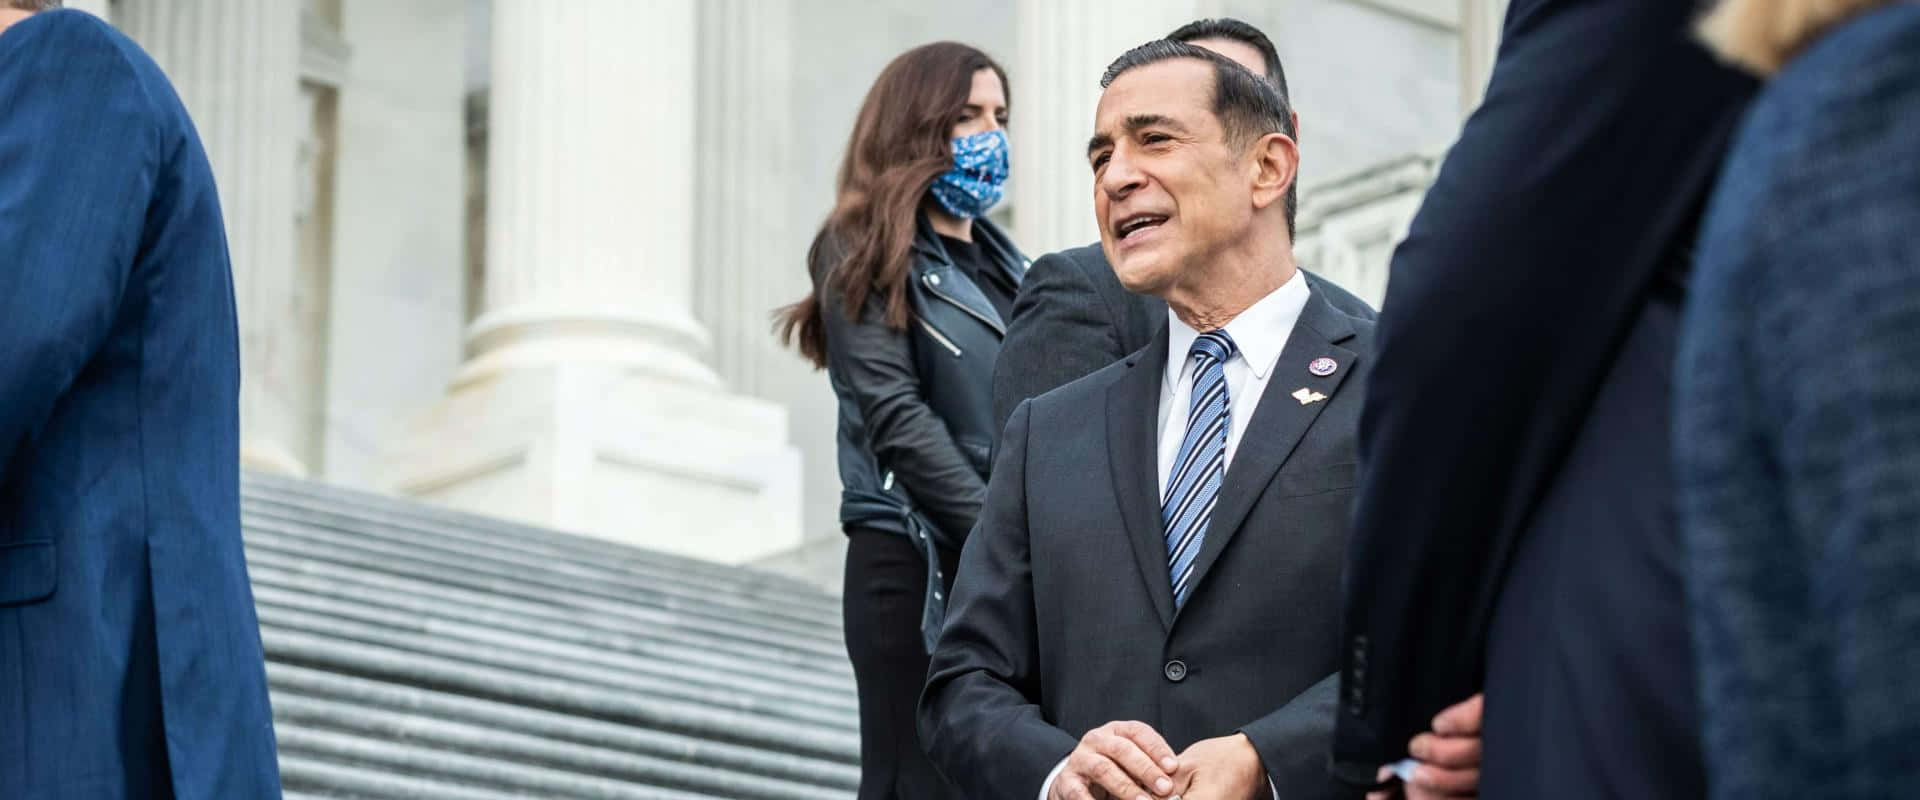 Darrell Issa Posing on the Steps of the U.S Capitol Building Wallpaper